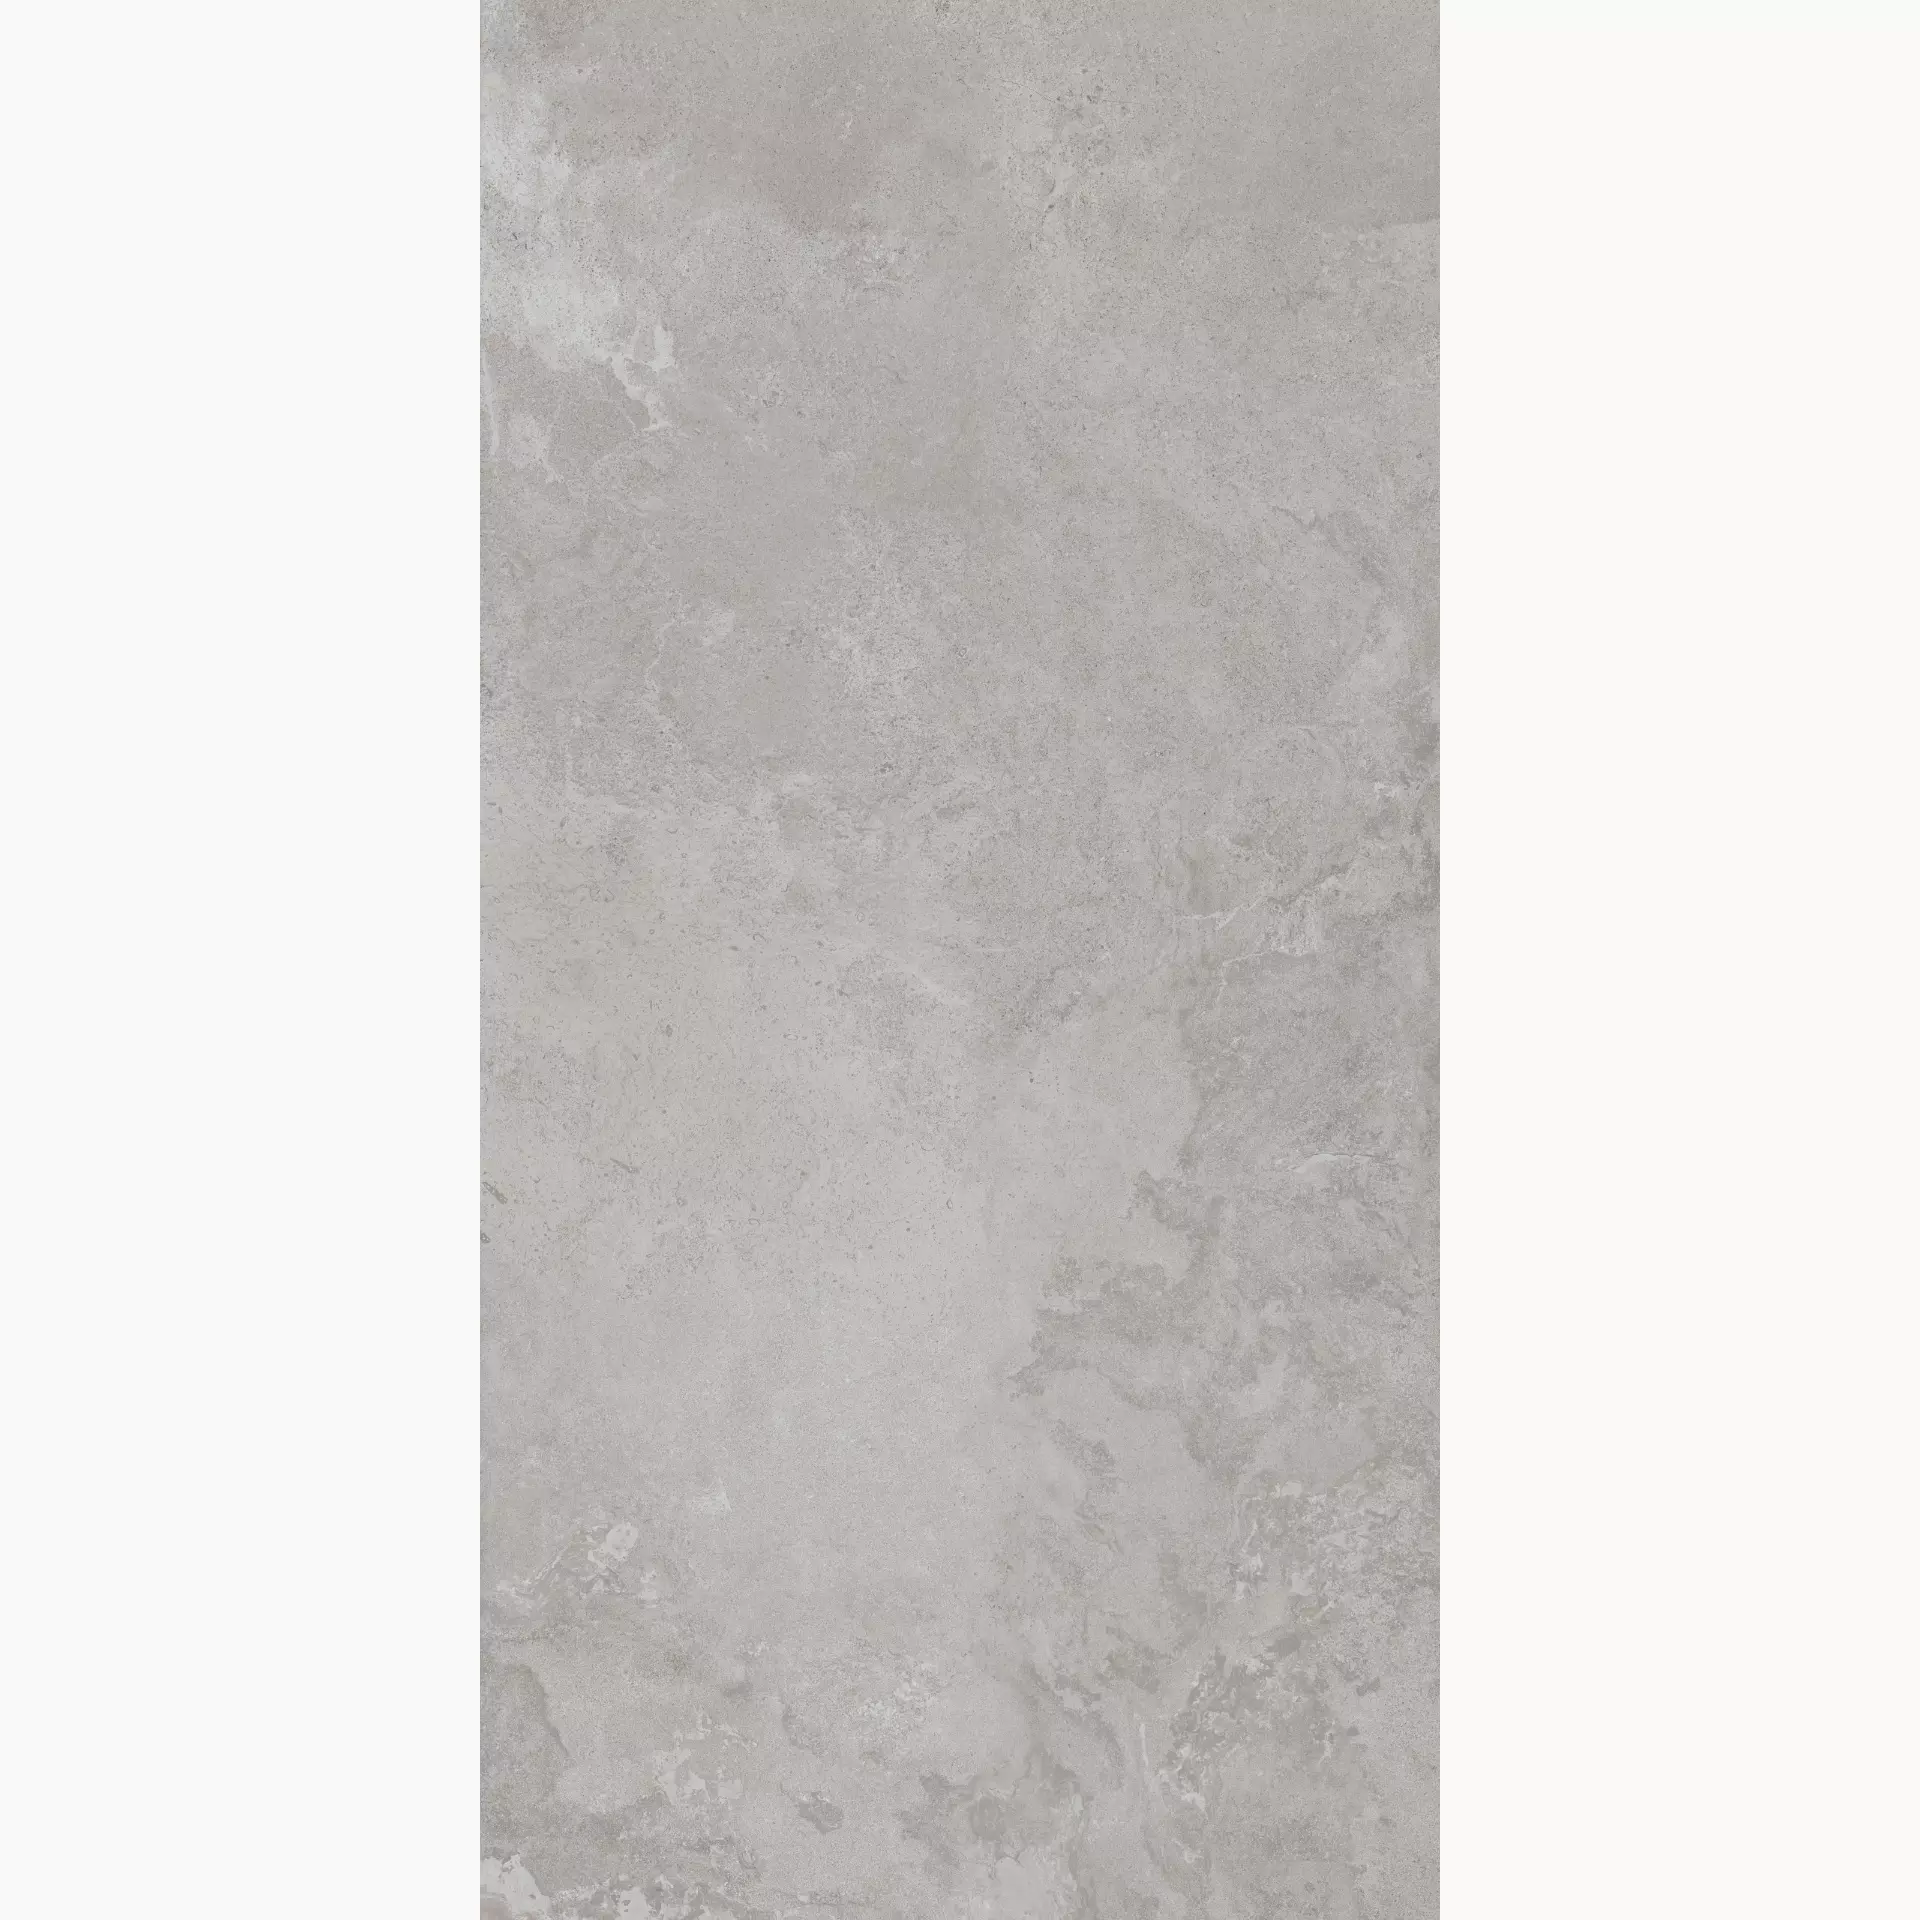 ABK Alpes Wide Grey Naturale PF60010579 120x280cm rectified 6mm